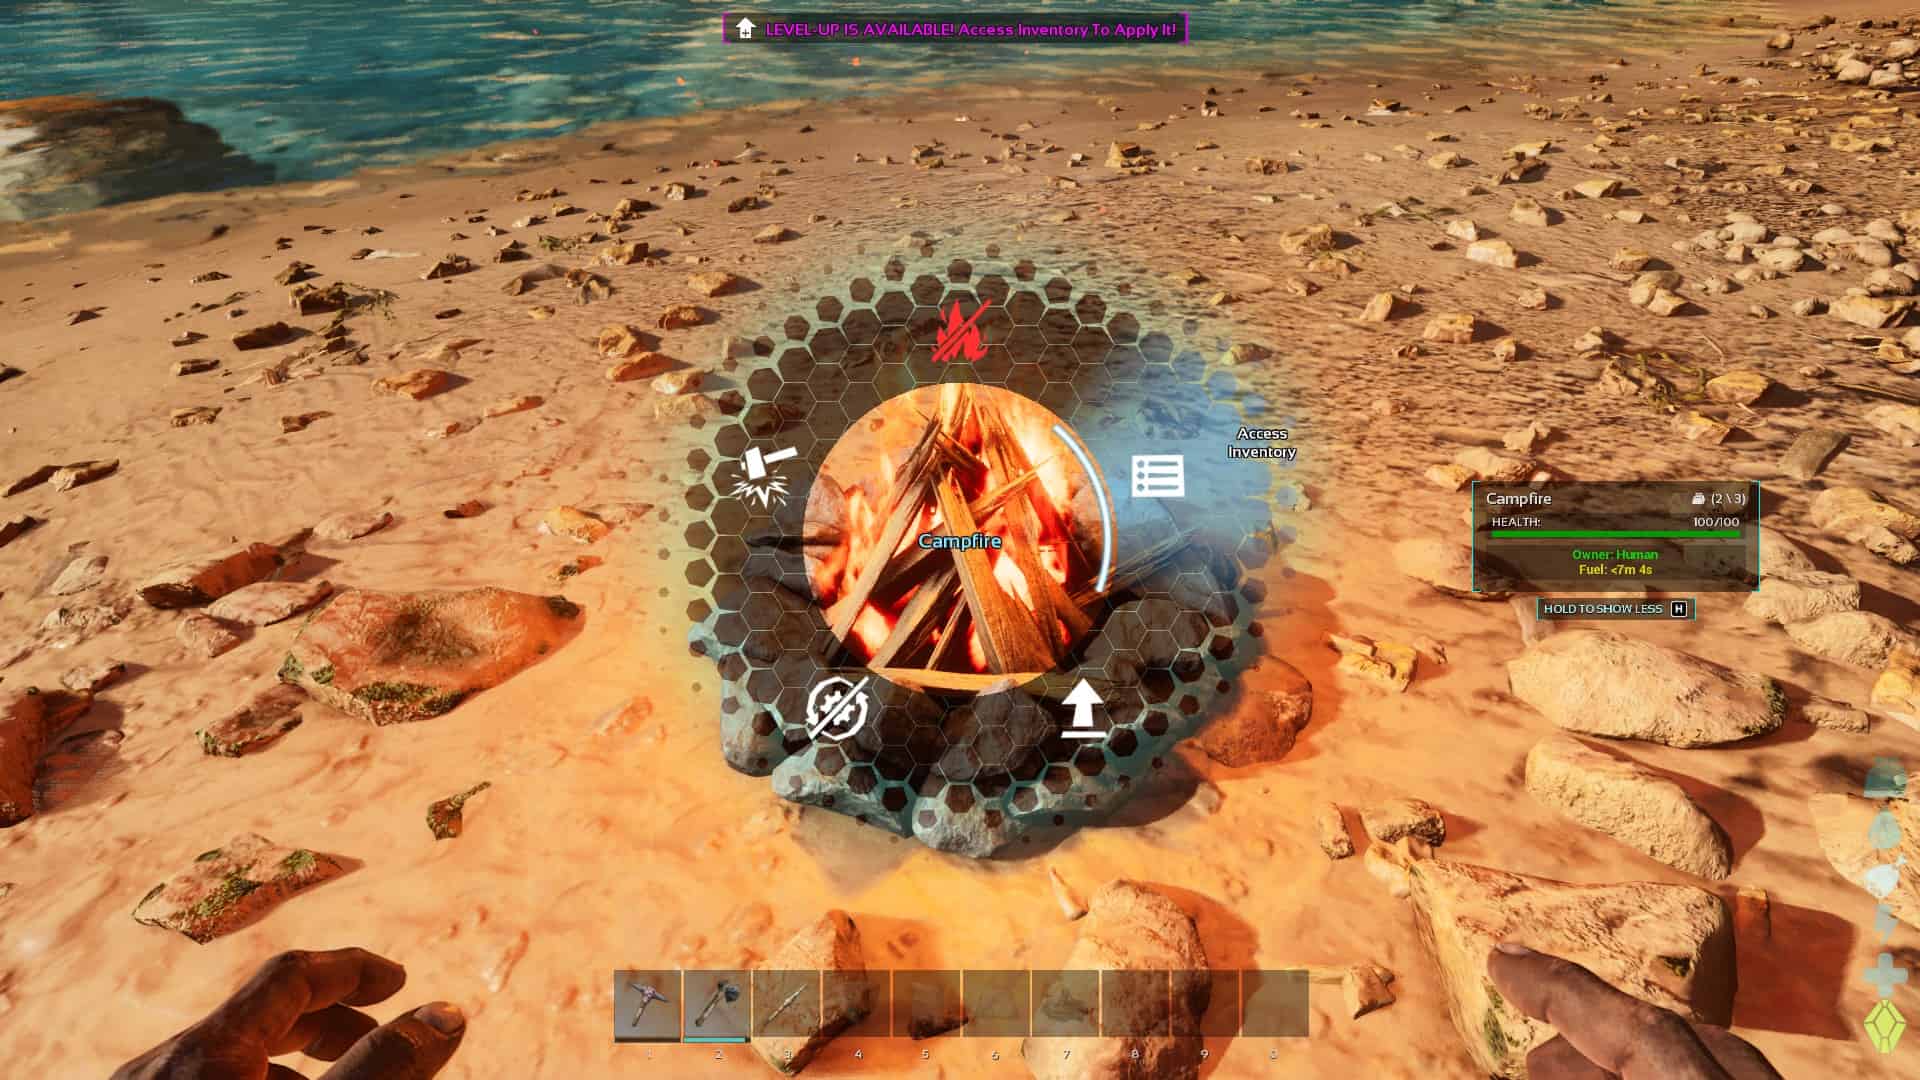 ARK Survival Ascended how to cook meat: Opening the inventory of a campfire